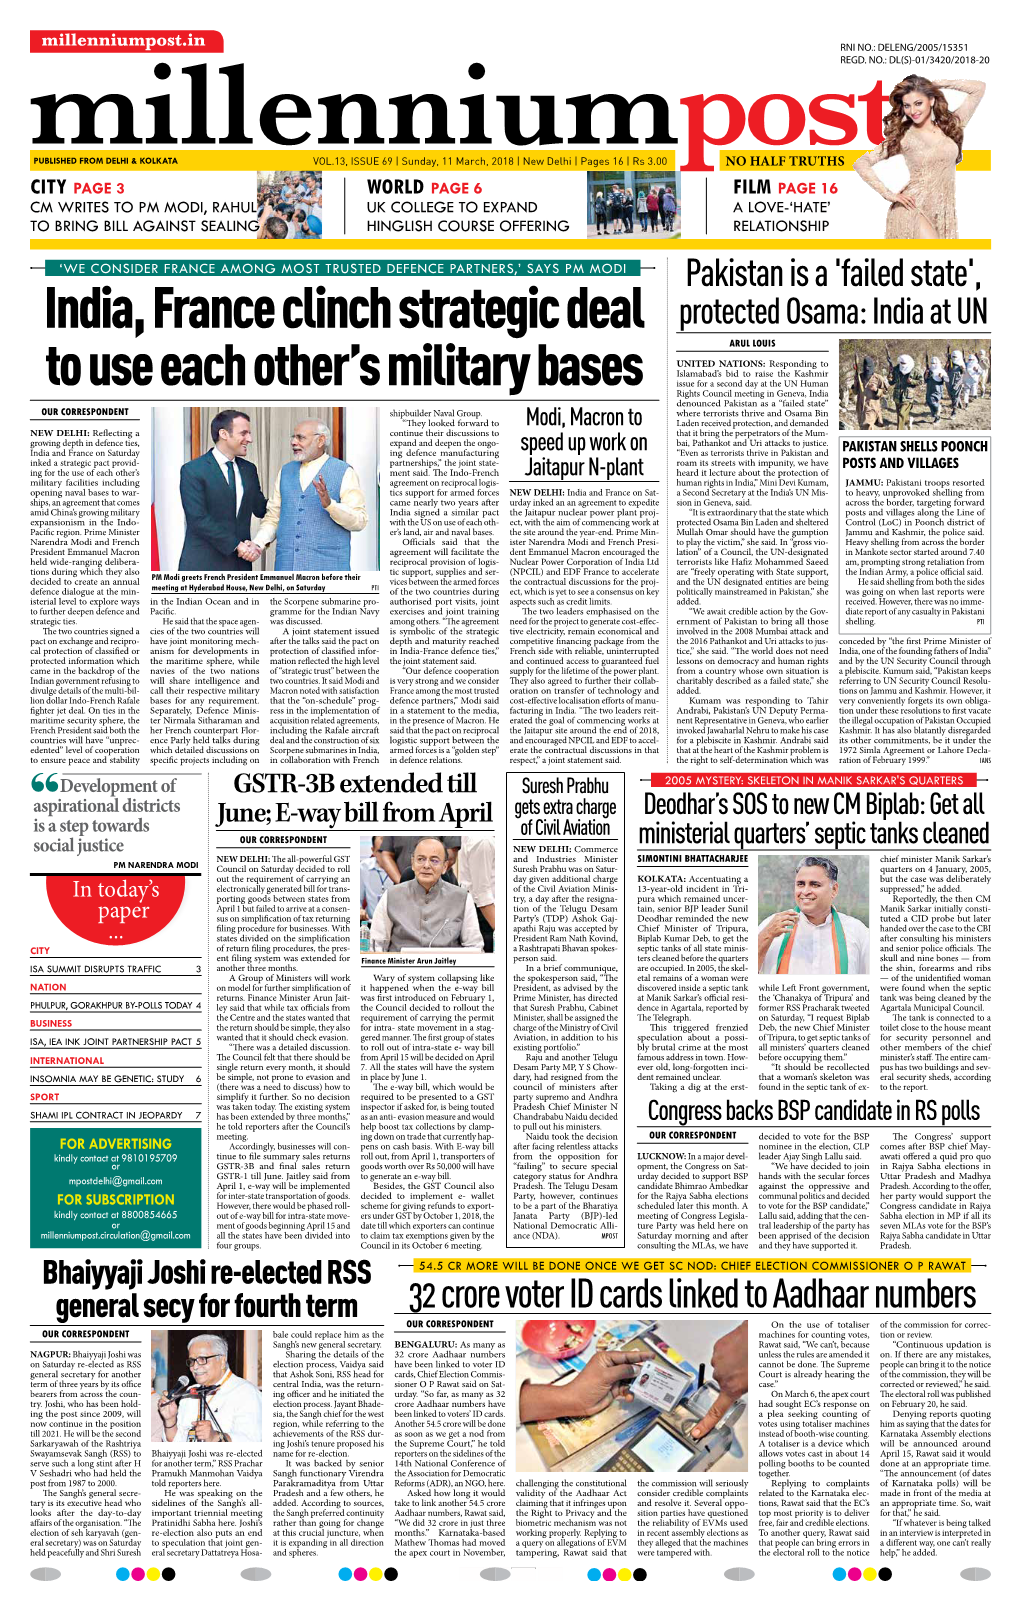 India, France Clinch Strategic Deal to Use Each Other's Military Bases